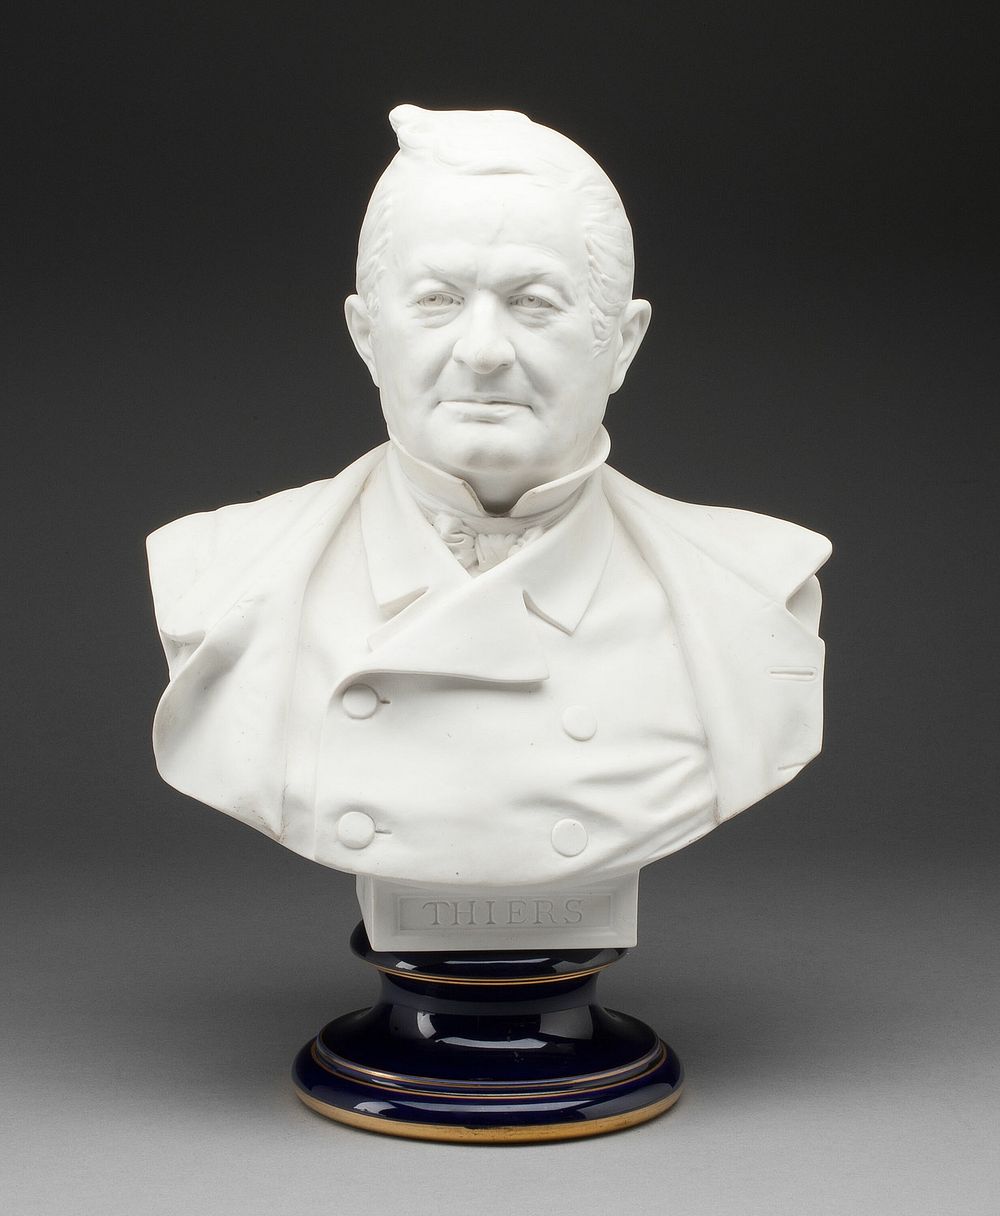 Bust of President Thiers by Manufacture nationale de Sèvres (Manufacturer)